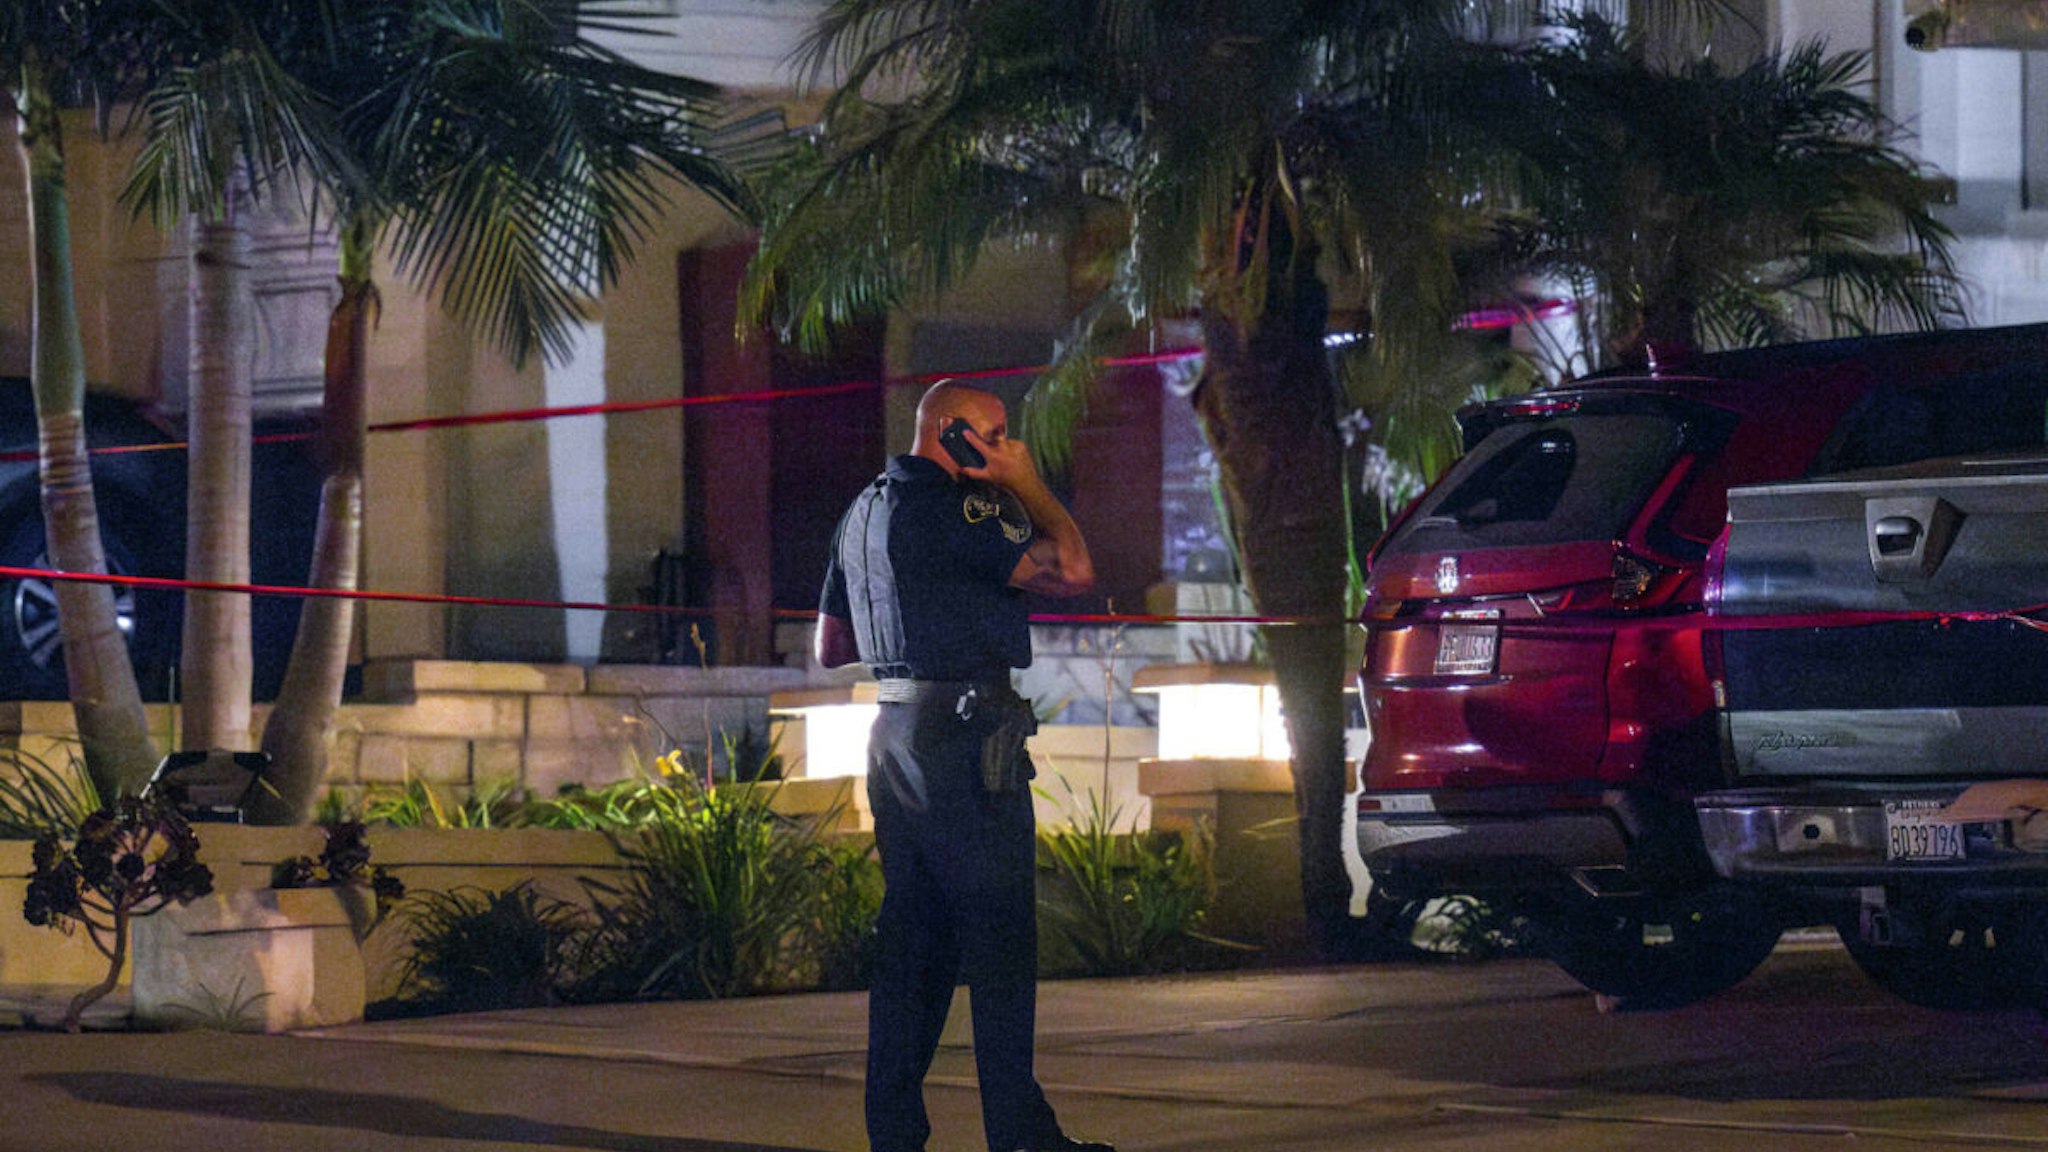 ANAHEIM, CA - AUGUST 03: An Anaheim Police officer stands outside a home, right, in the 8500 block of E. Canyon Vista Drive in Anaheim on Thursday, August 3, 2023 where Orange County Superior Court Judge Jeffrey Ferguson was taken into custody by Anaheim police after a shooting death of his wife, according to multiple sources.